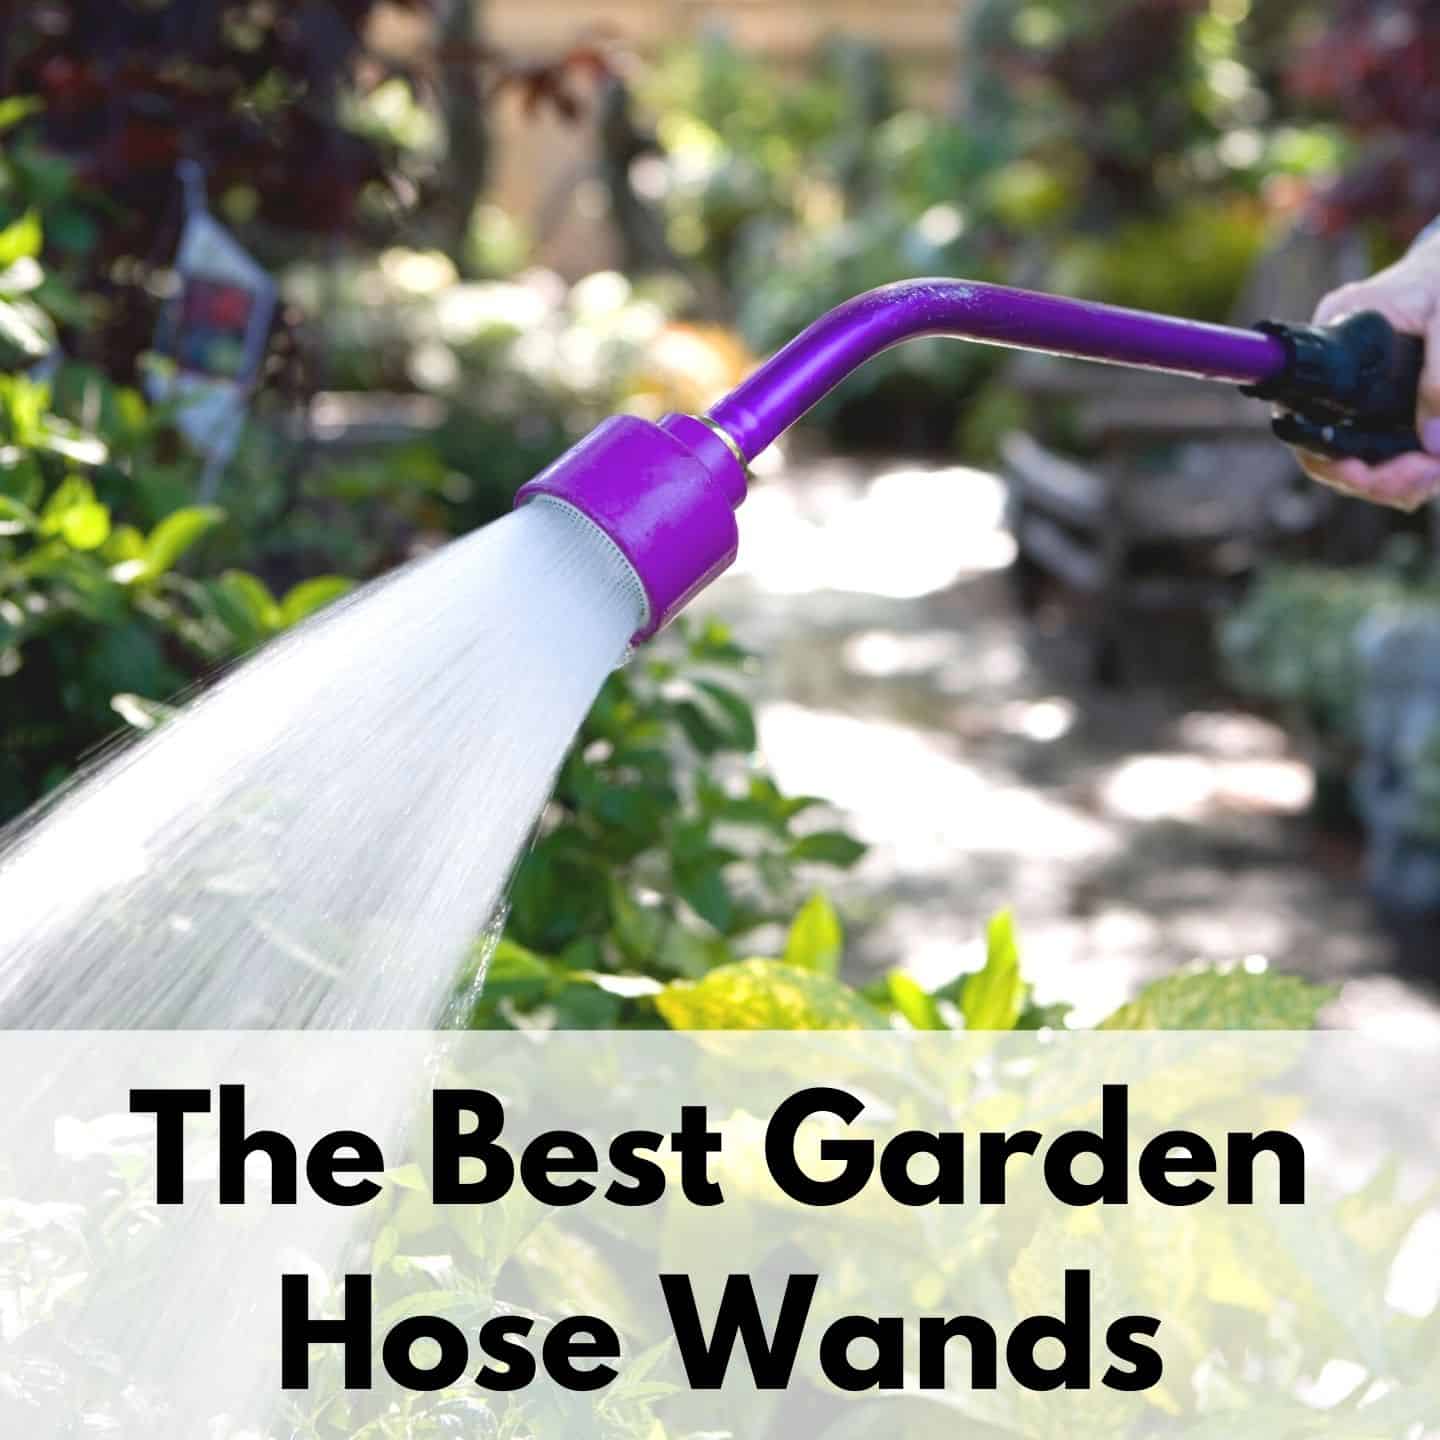 The Best Garden Hose Nozzles For A Healthy Lawn Garden Together Time Family